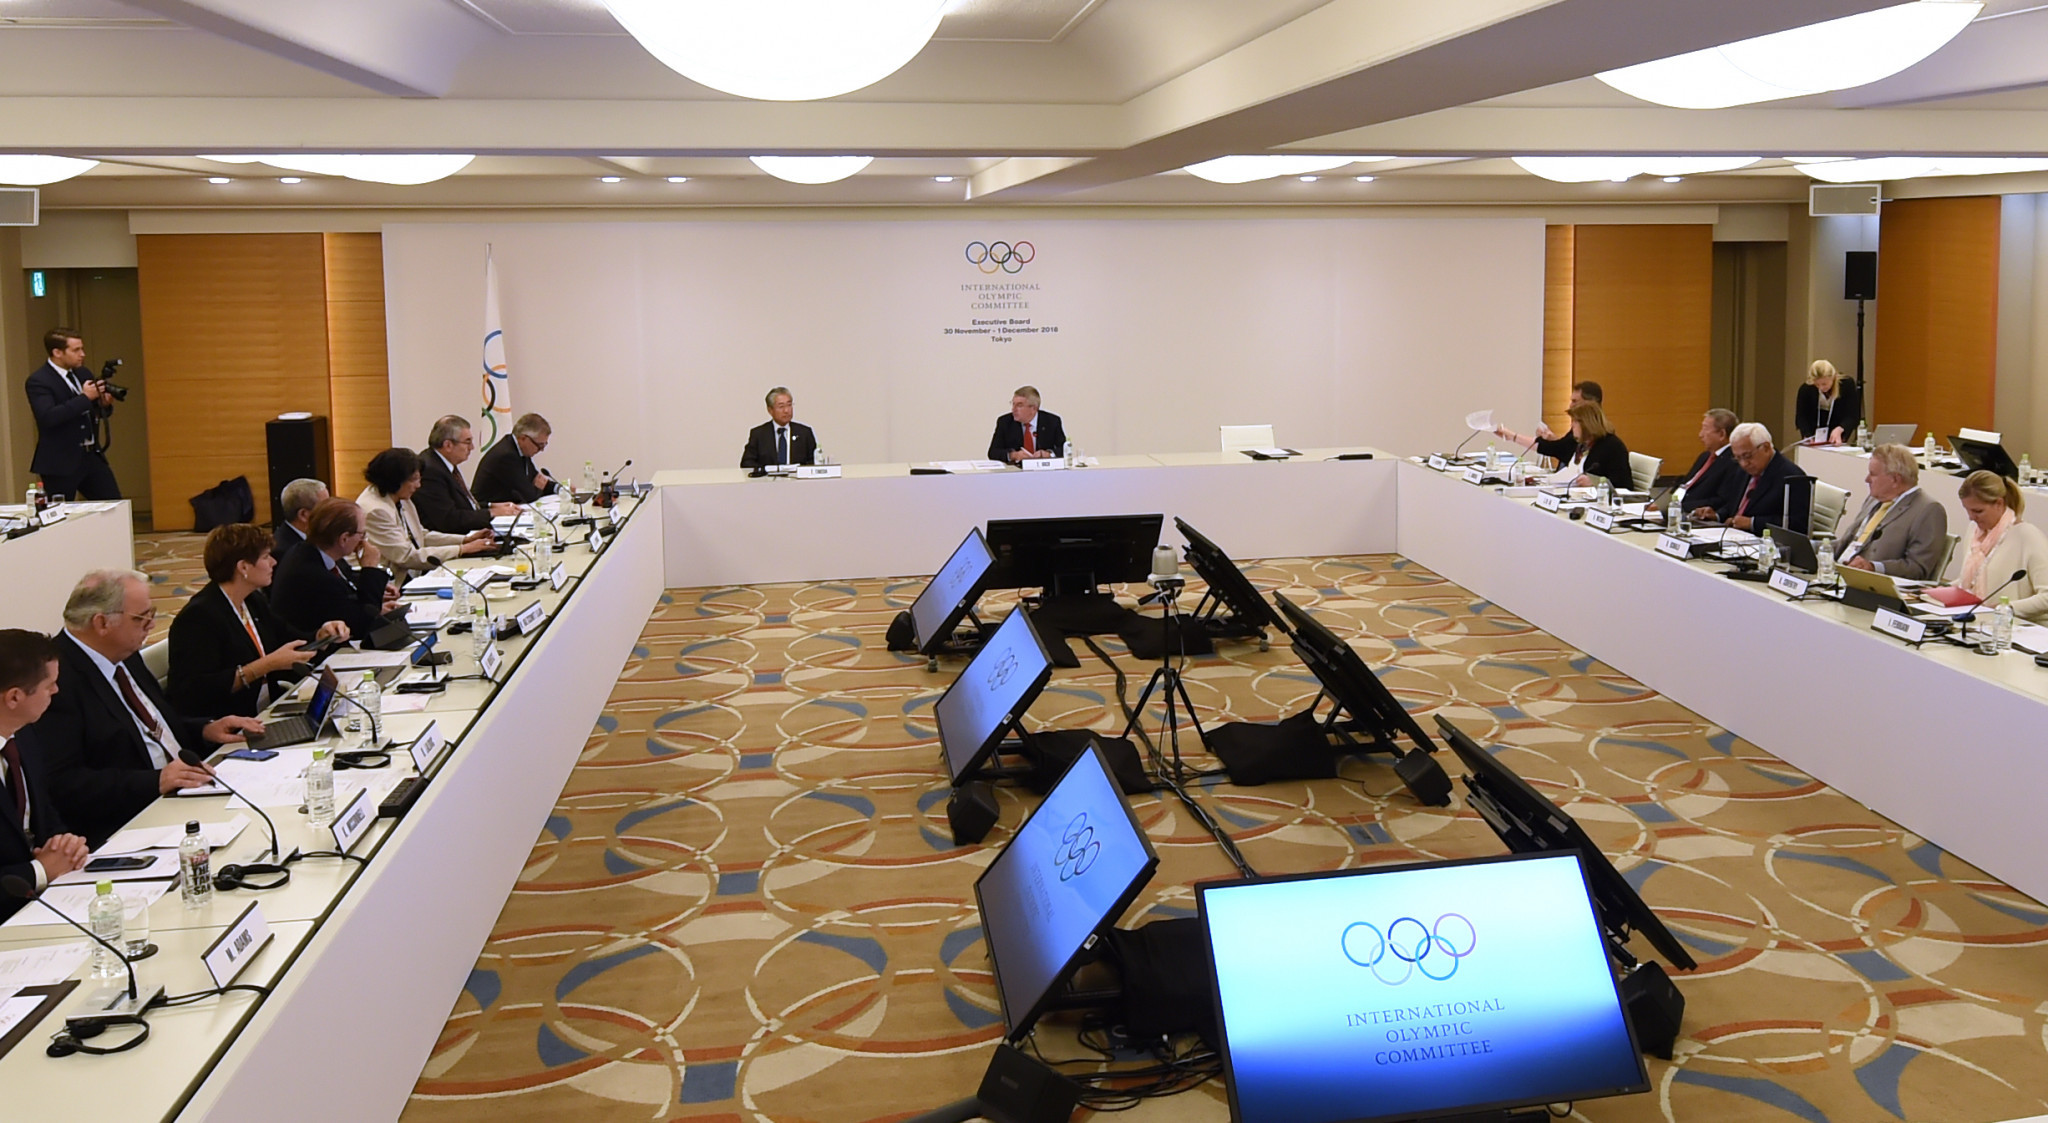 AIBA launches late campaign to save itself as IOC Executive Board meets to decide future of Olympic boxing